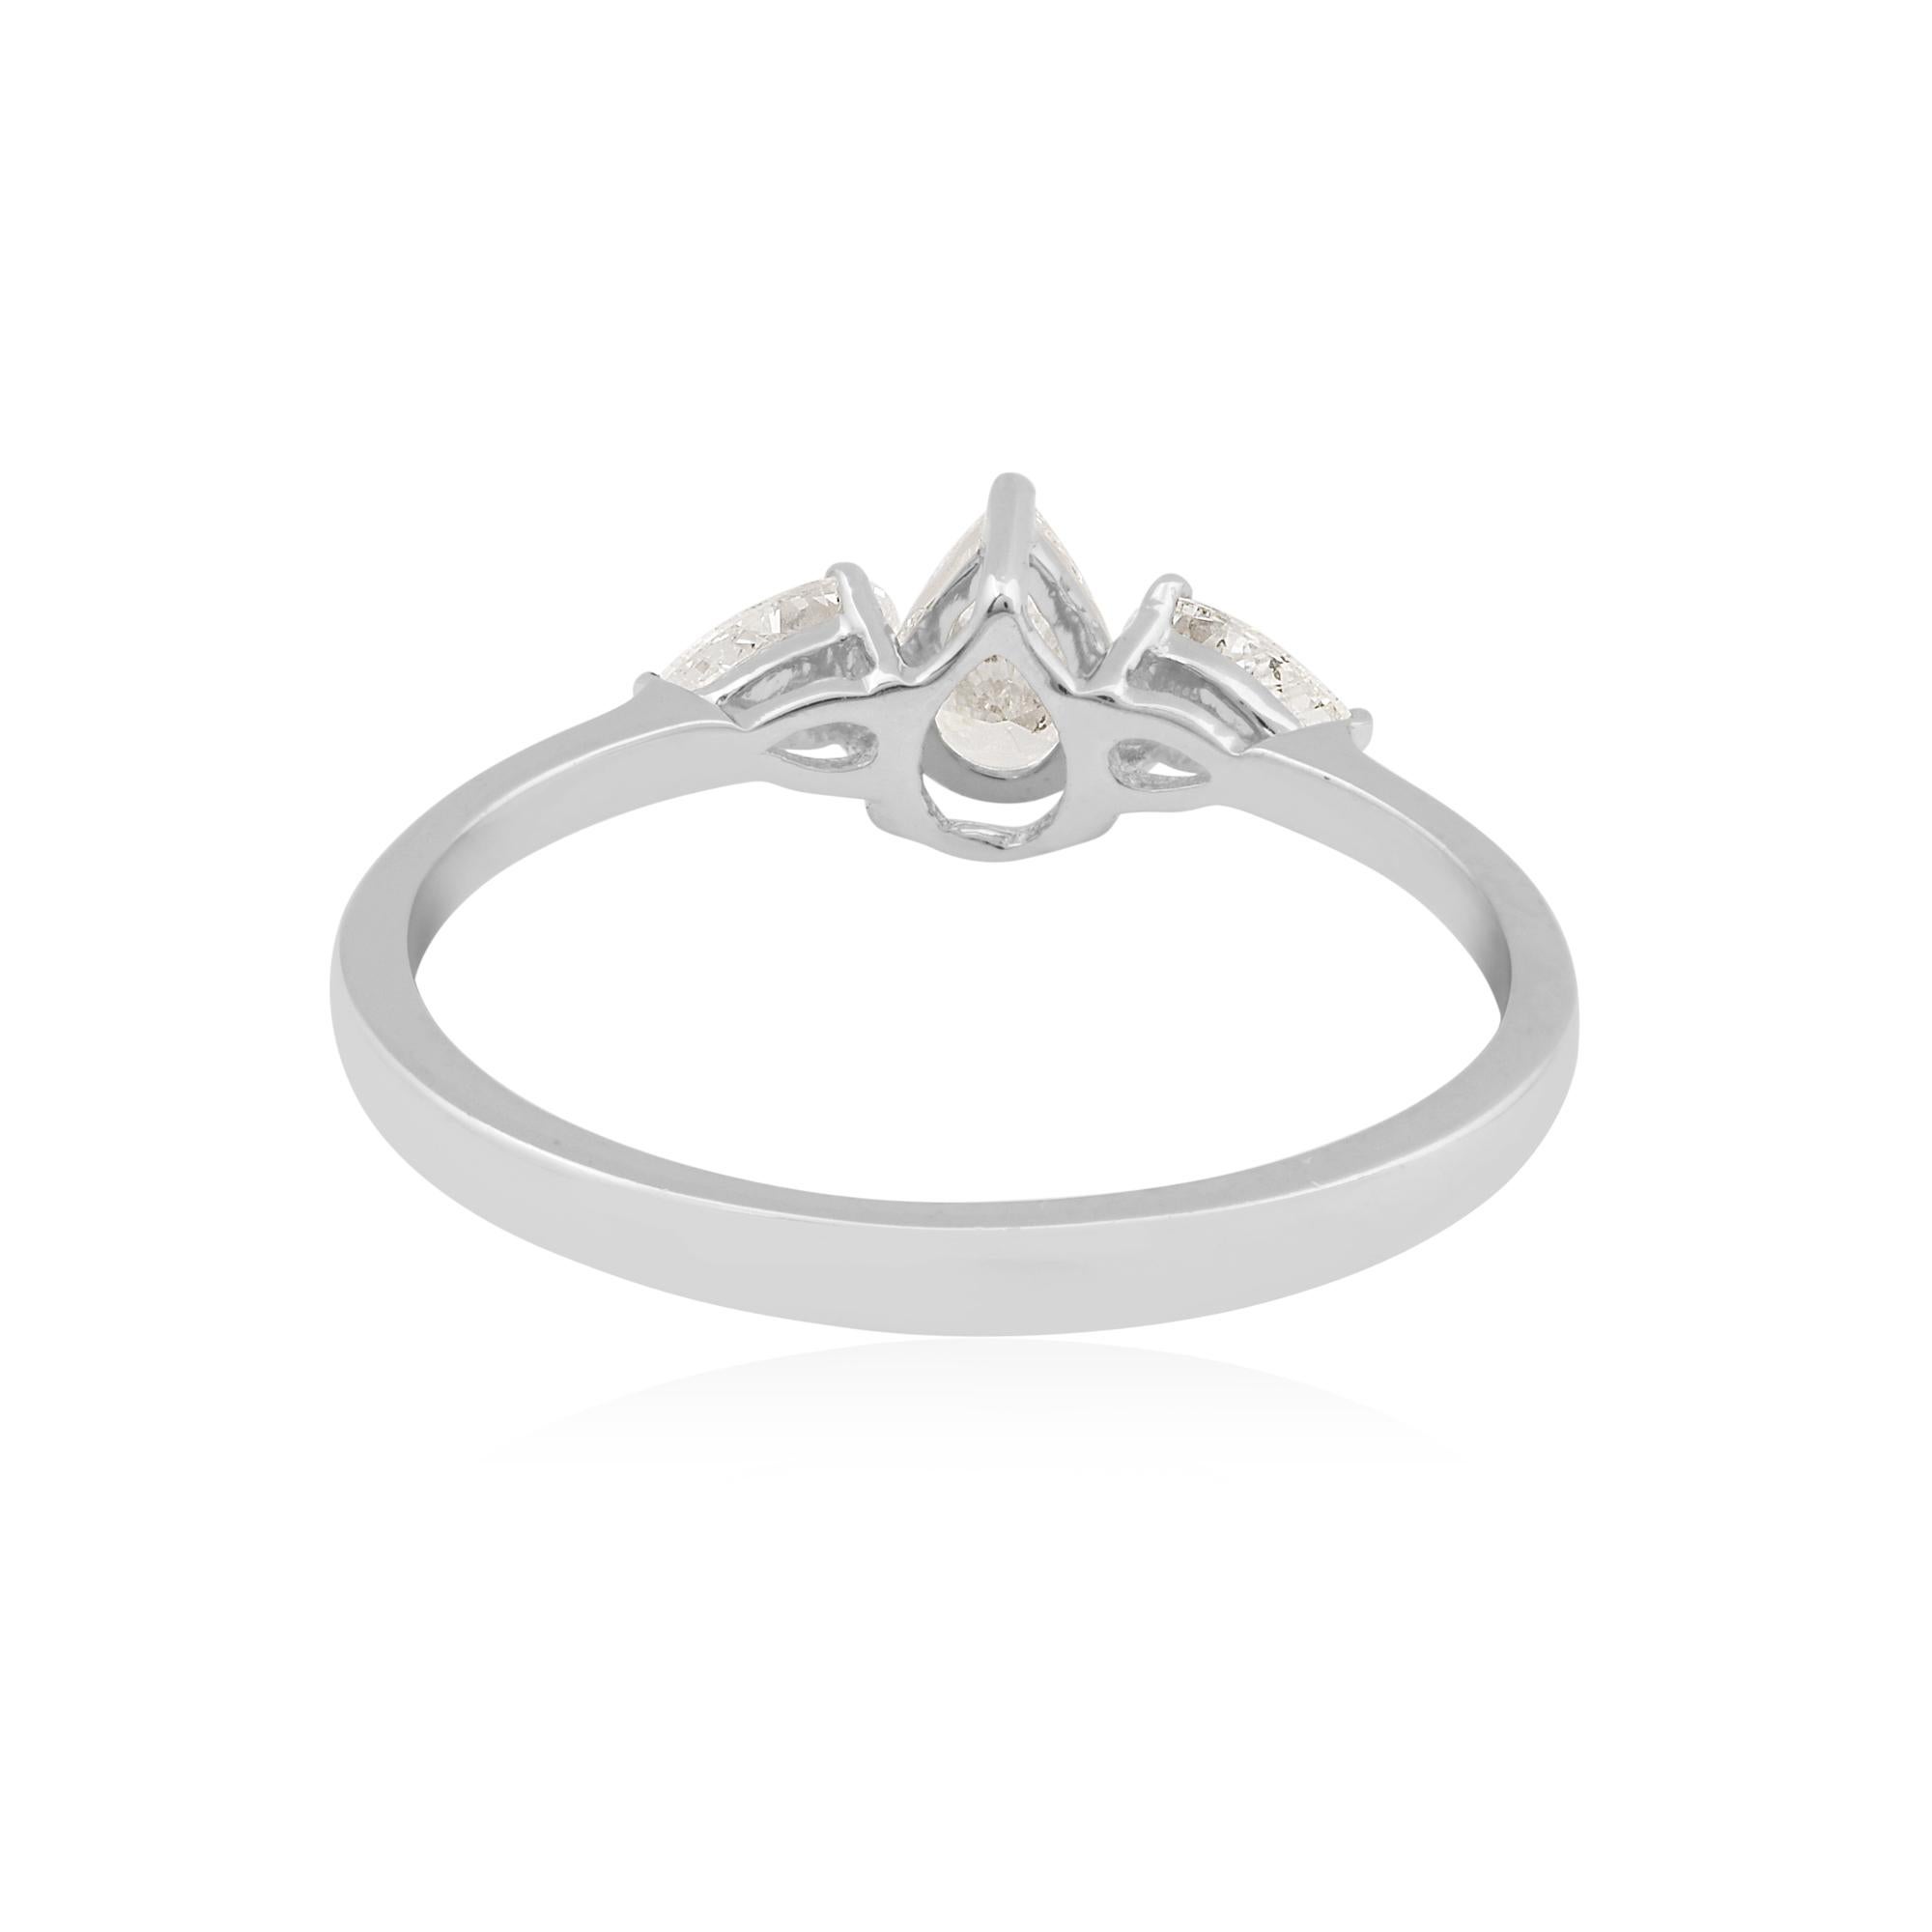 For Sale:  Real 0.53 Carat SI Clarity HI Color Solitaire Pear Diamond Ring 18k White Gold 5